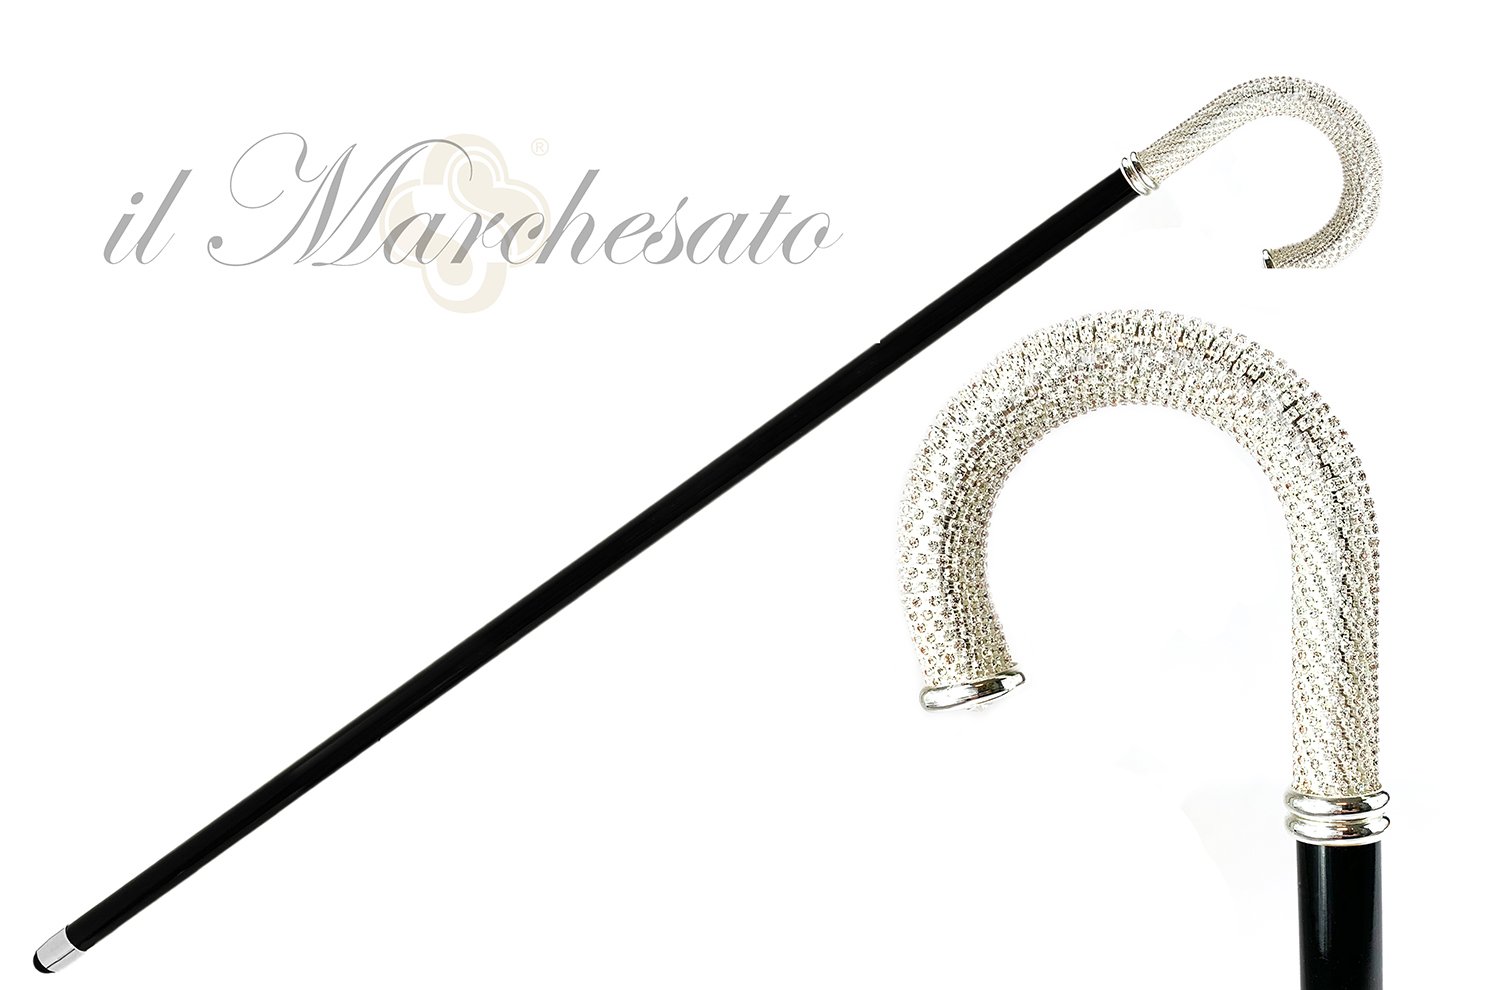 Luxury Walking stick for Man with thousands of white crystals - IL MARCHESATO LUXURY UMBRELLAS, CANES AND SHOEHORNS